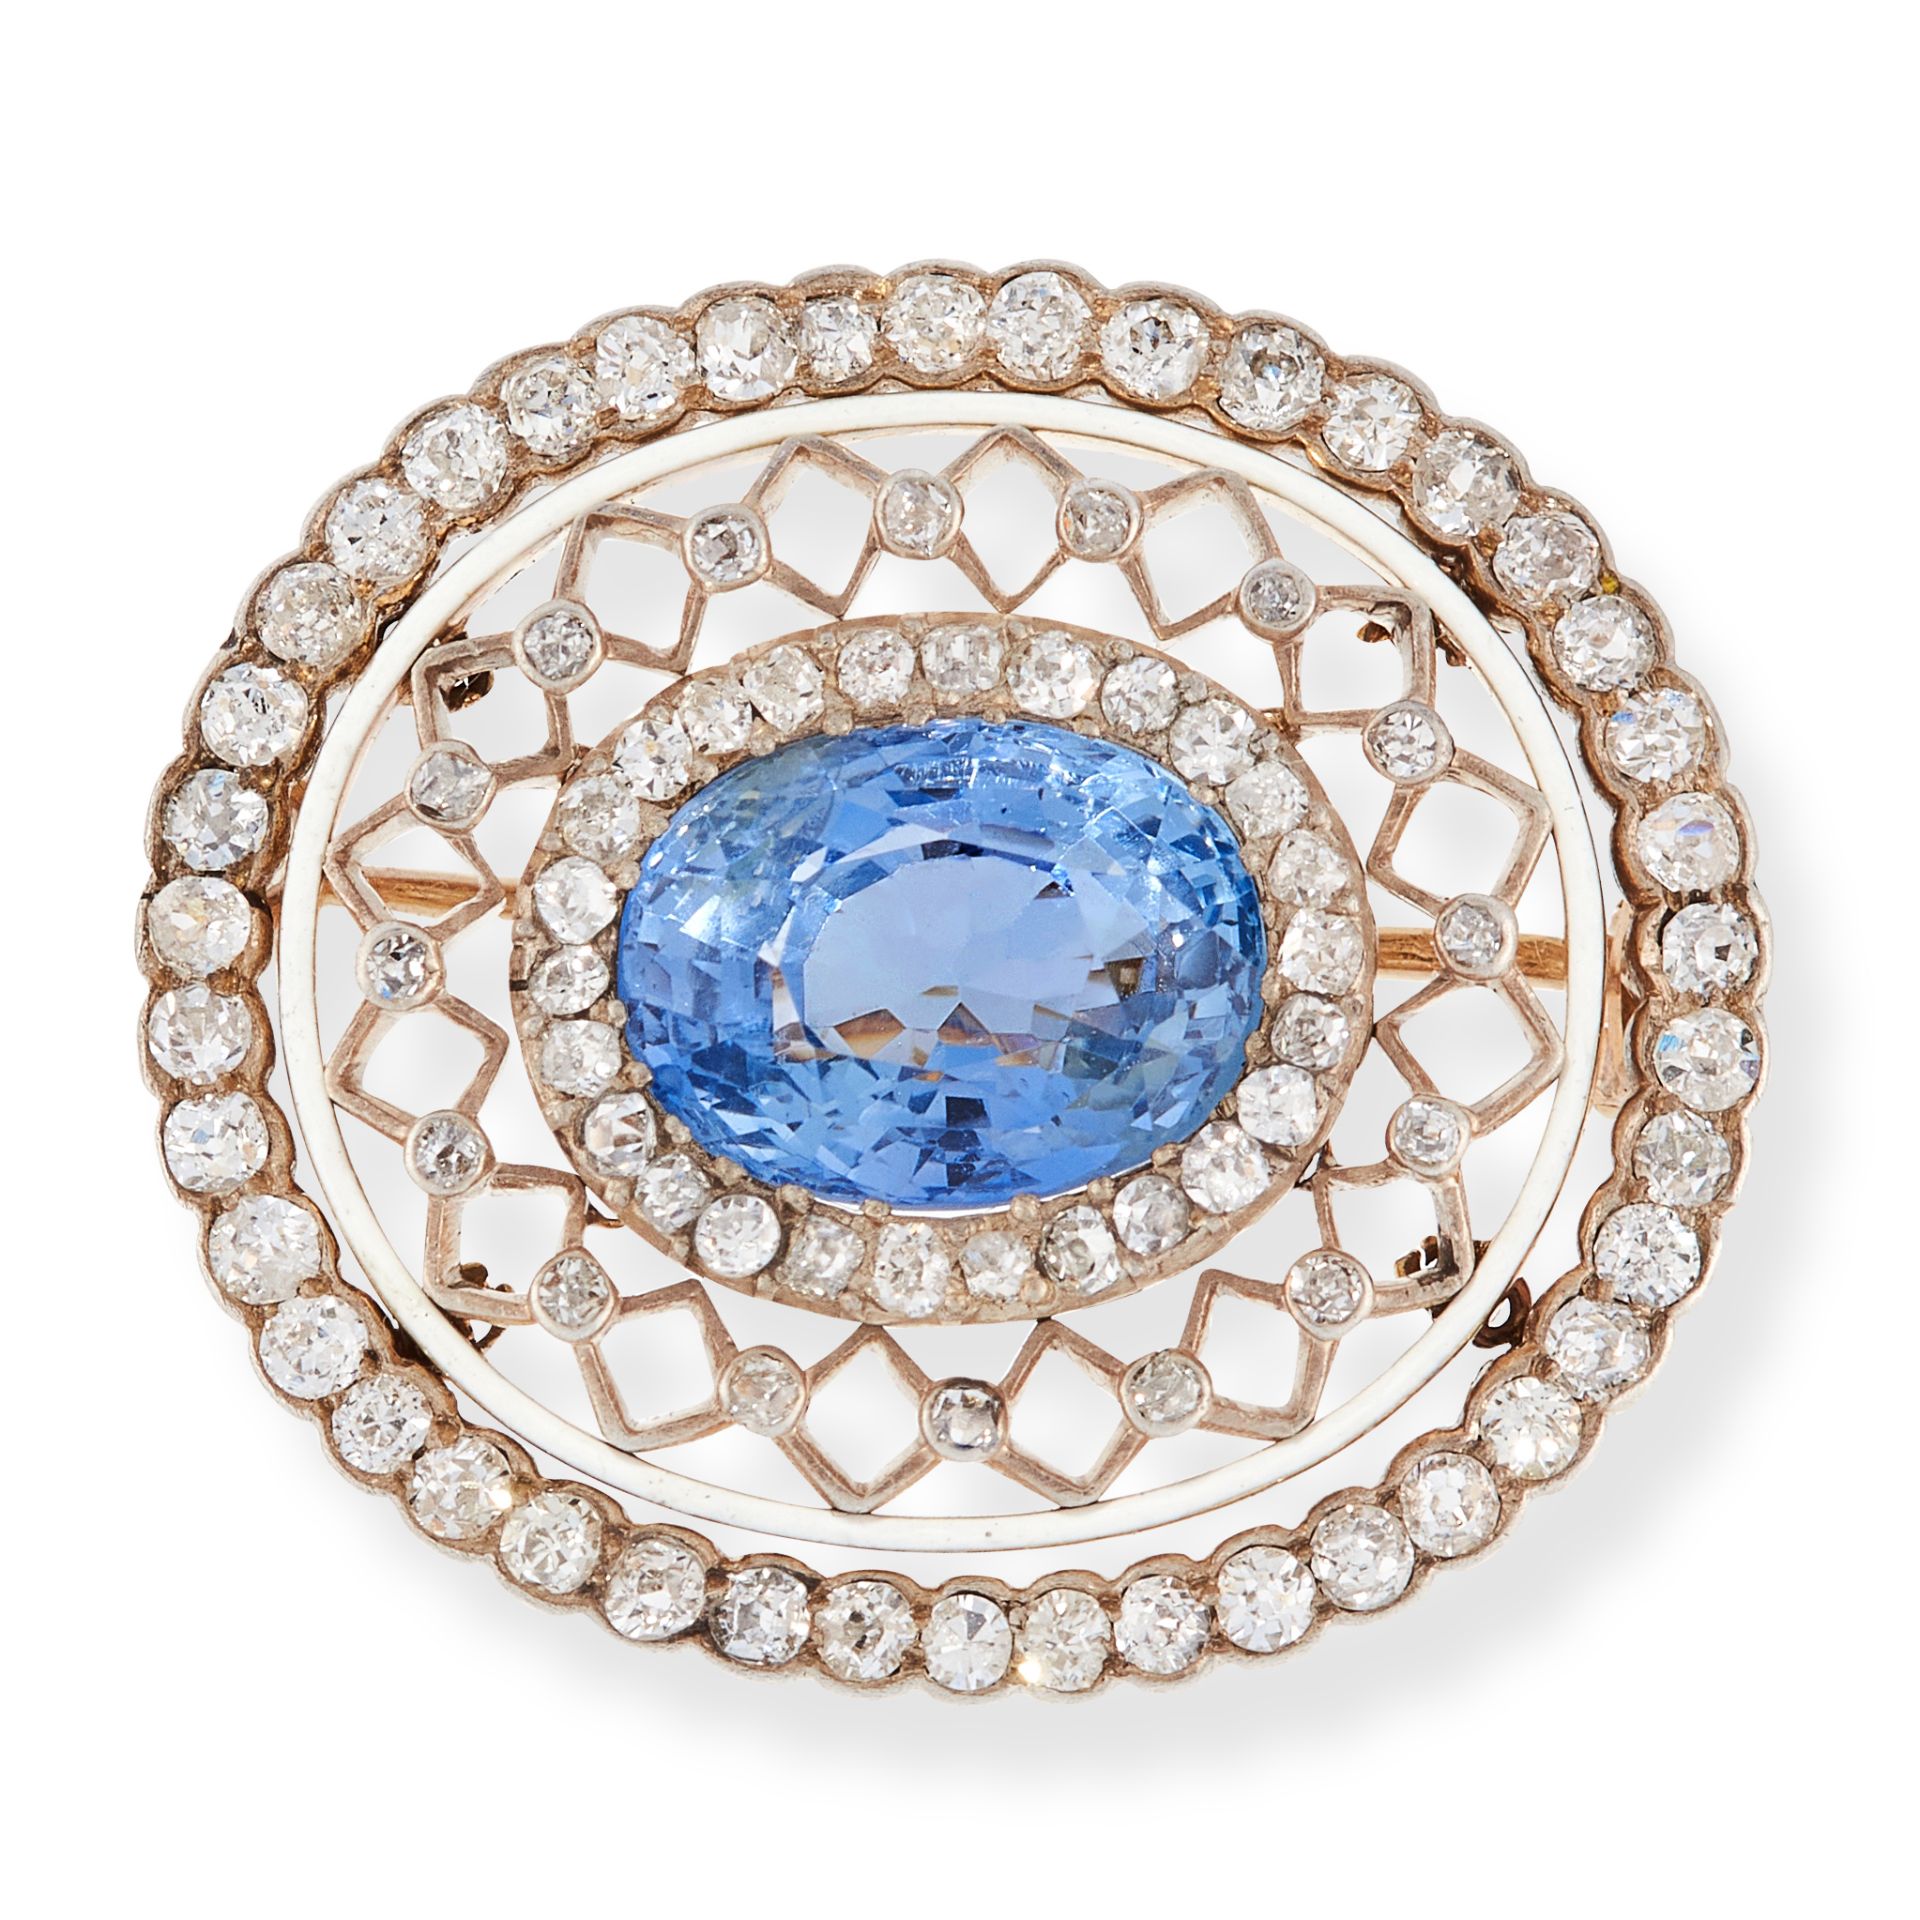 AN ANTIQUE CEYLON NO HEAT SAPPHIRE, DIAMOND AND ENAMEL BROOCH, LATE 19TH CENTURY in yellow gold